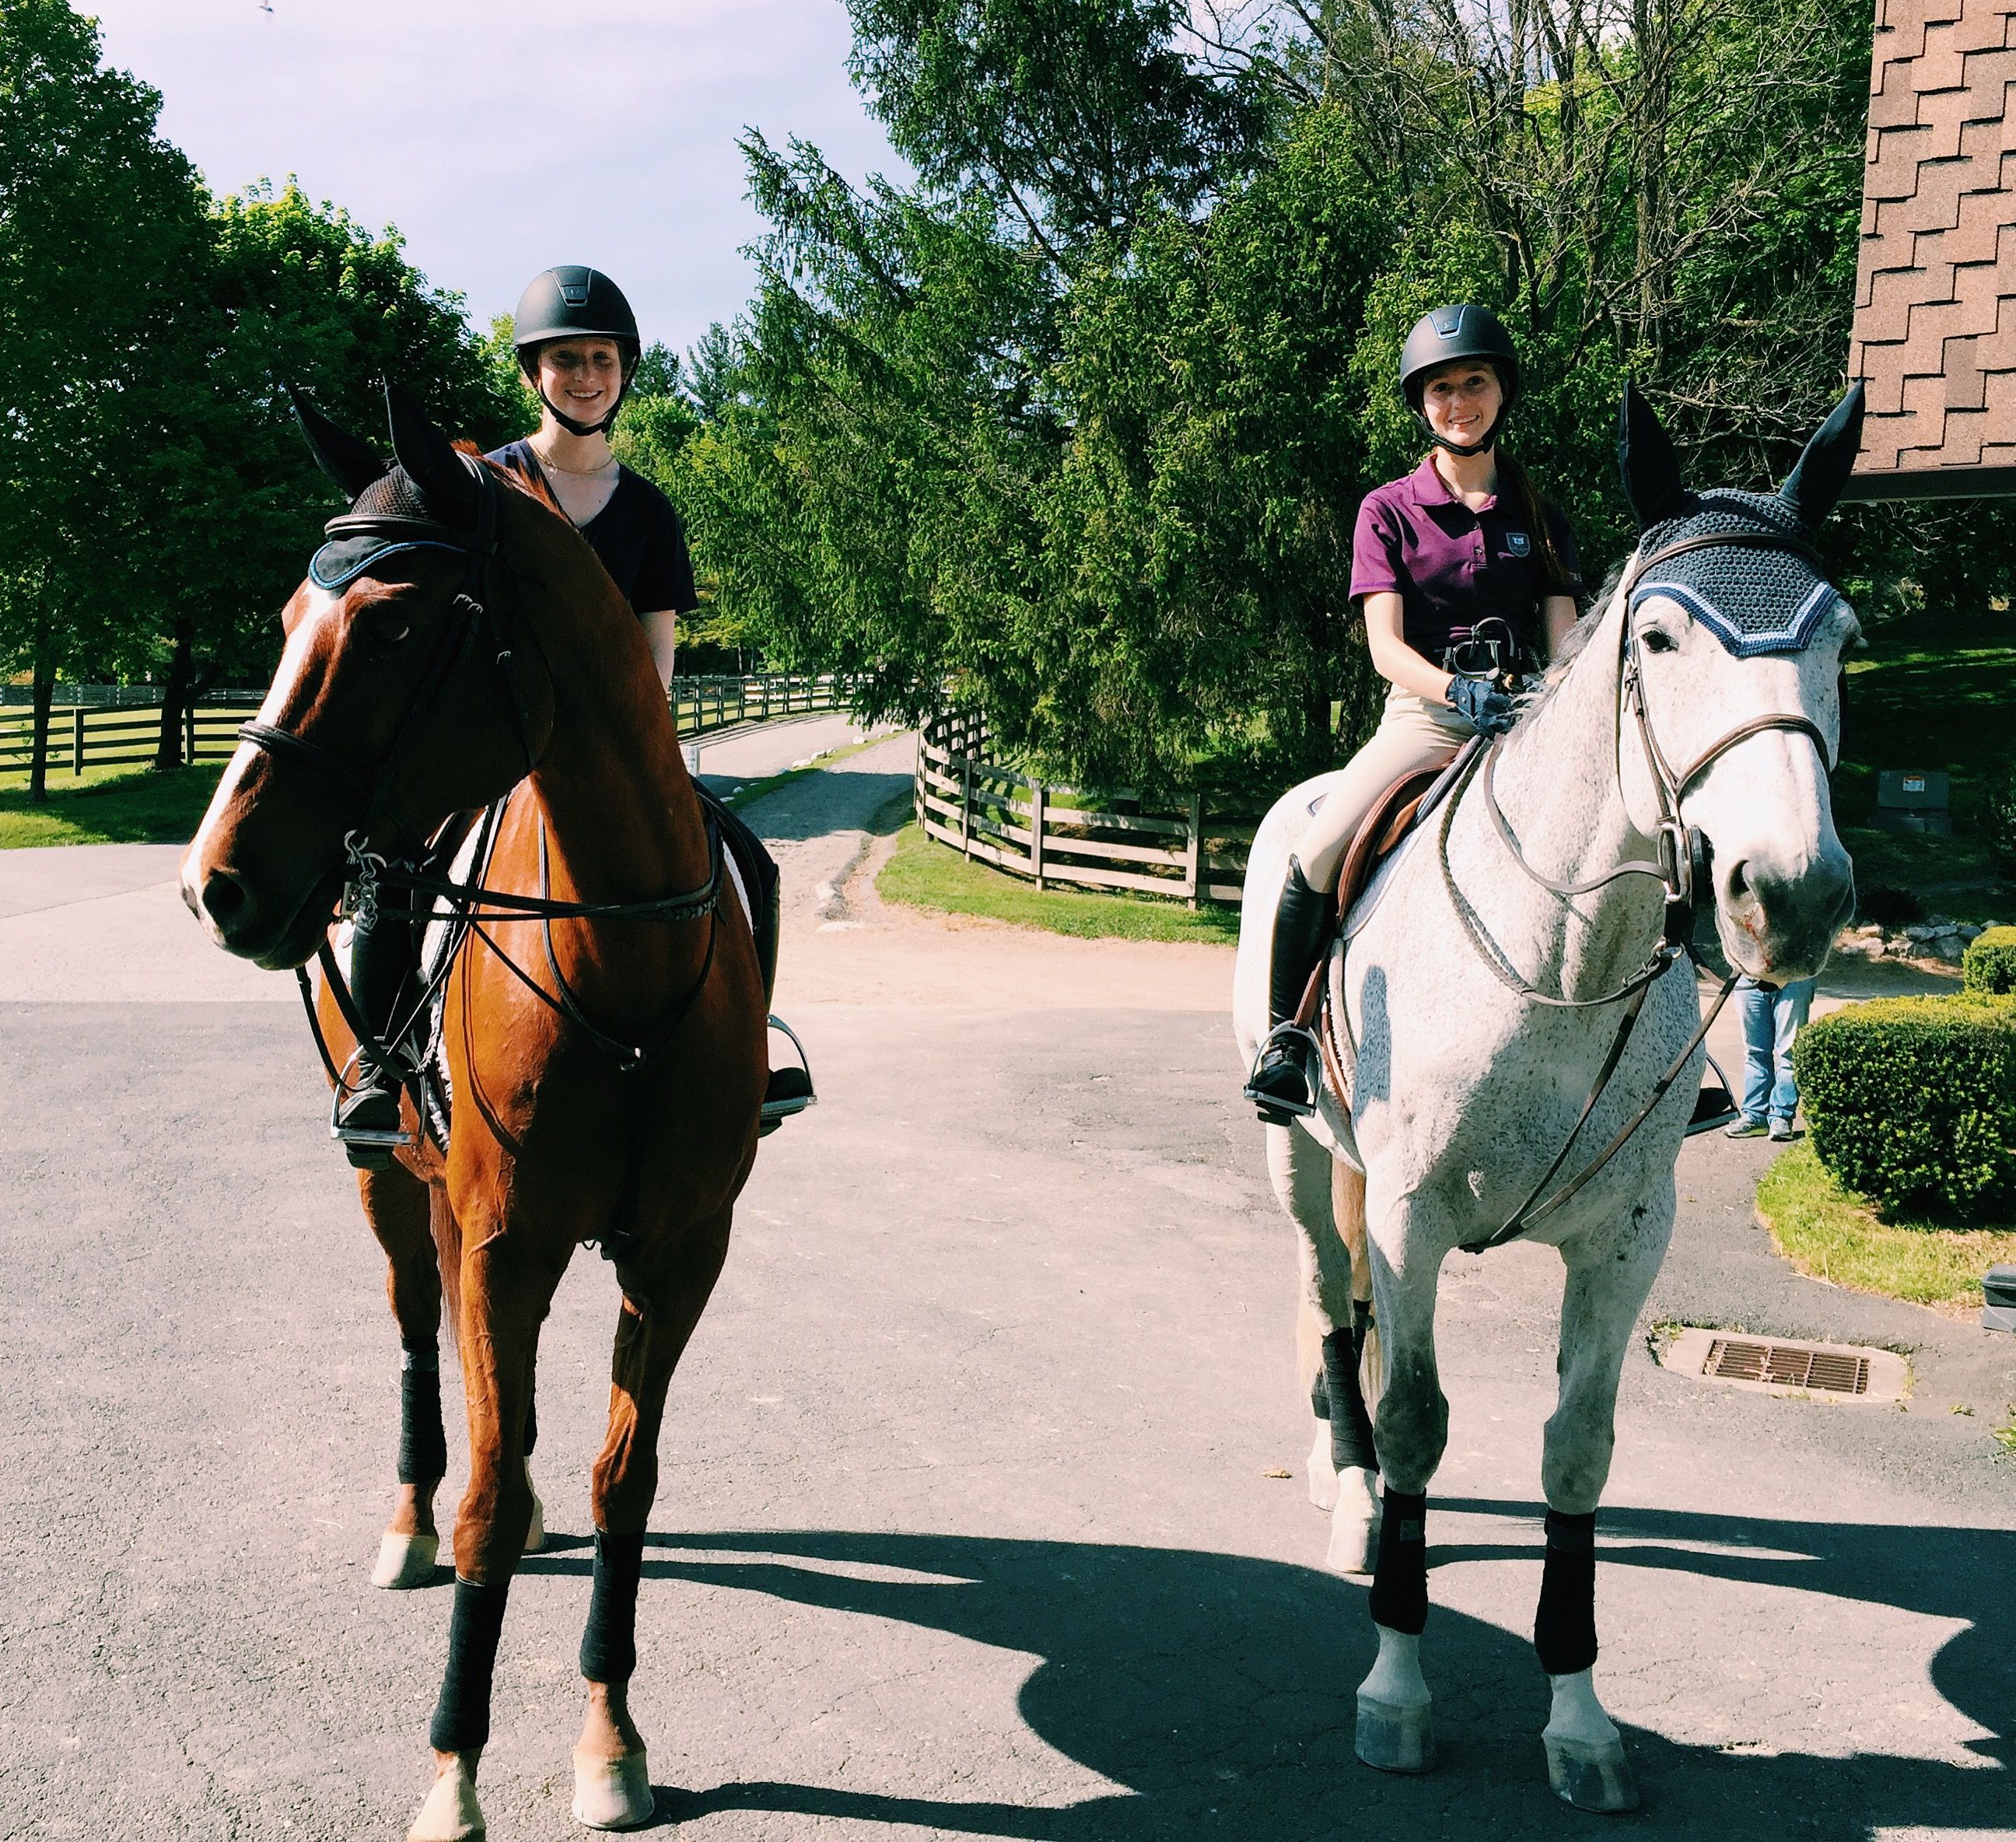 Riding with your best friend and having your horses be best friends ...